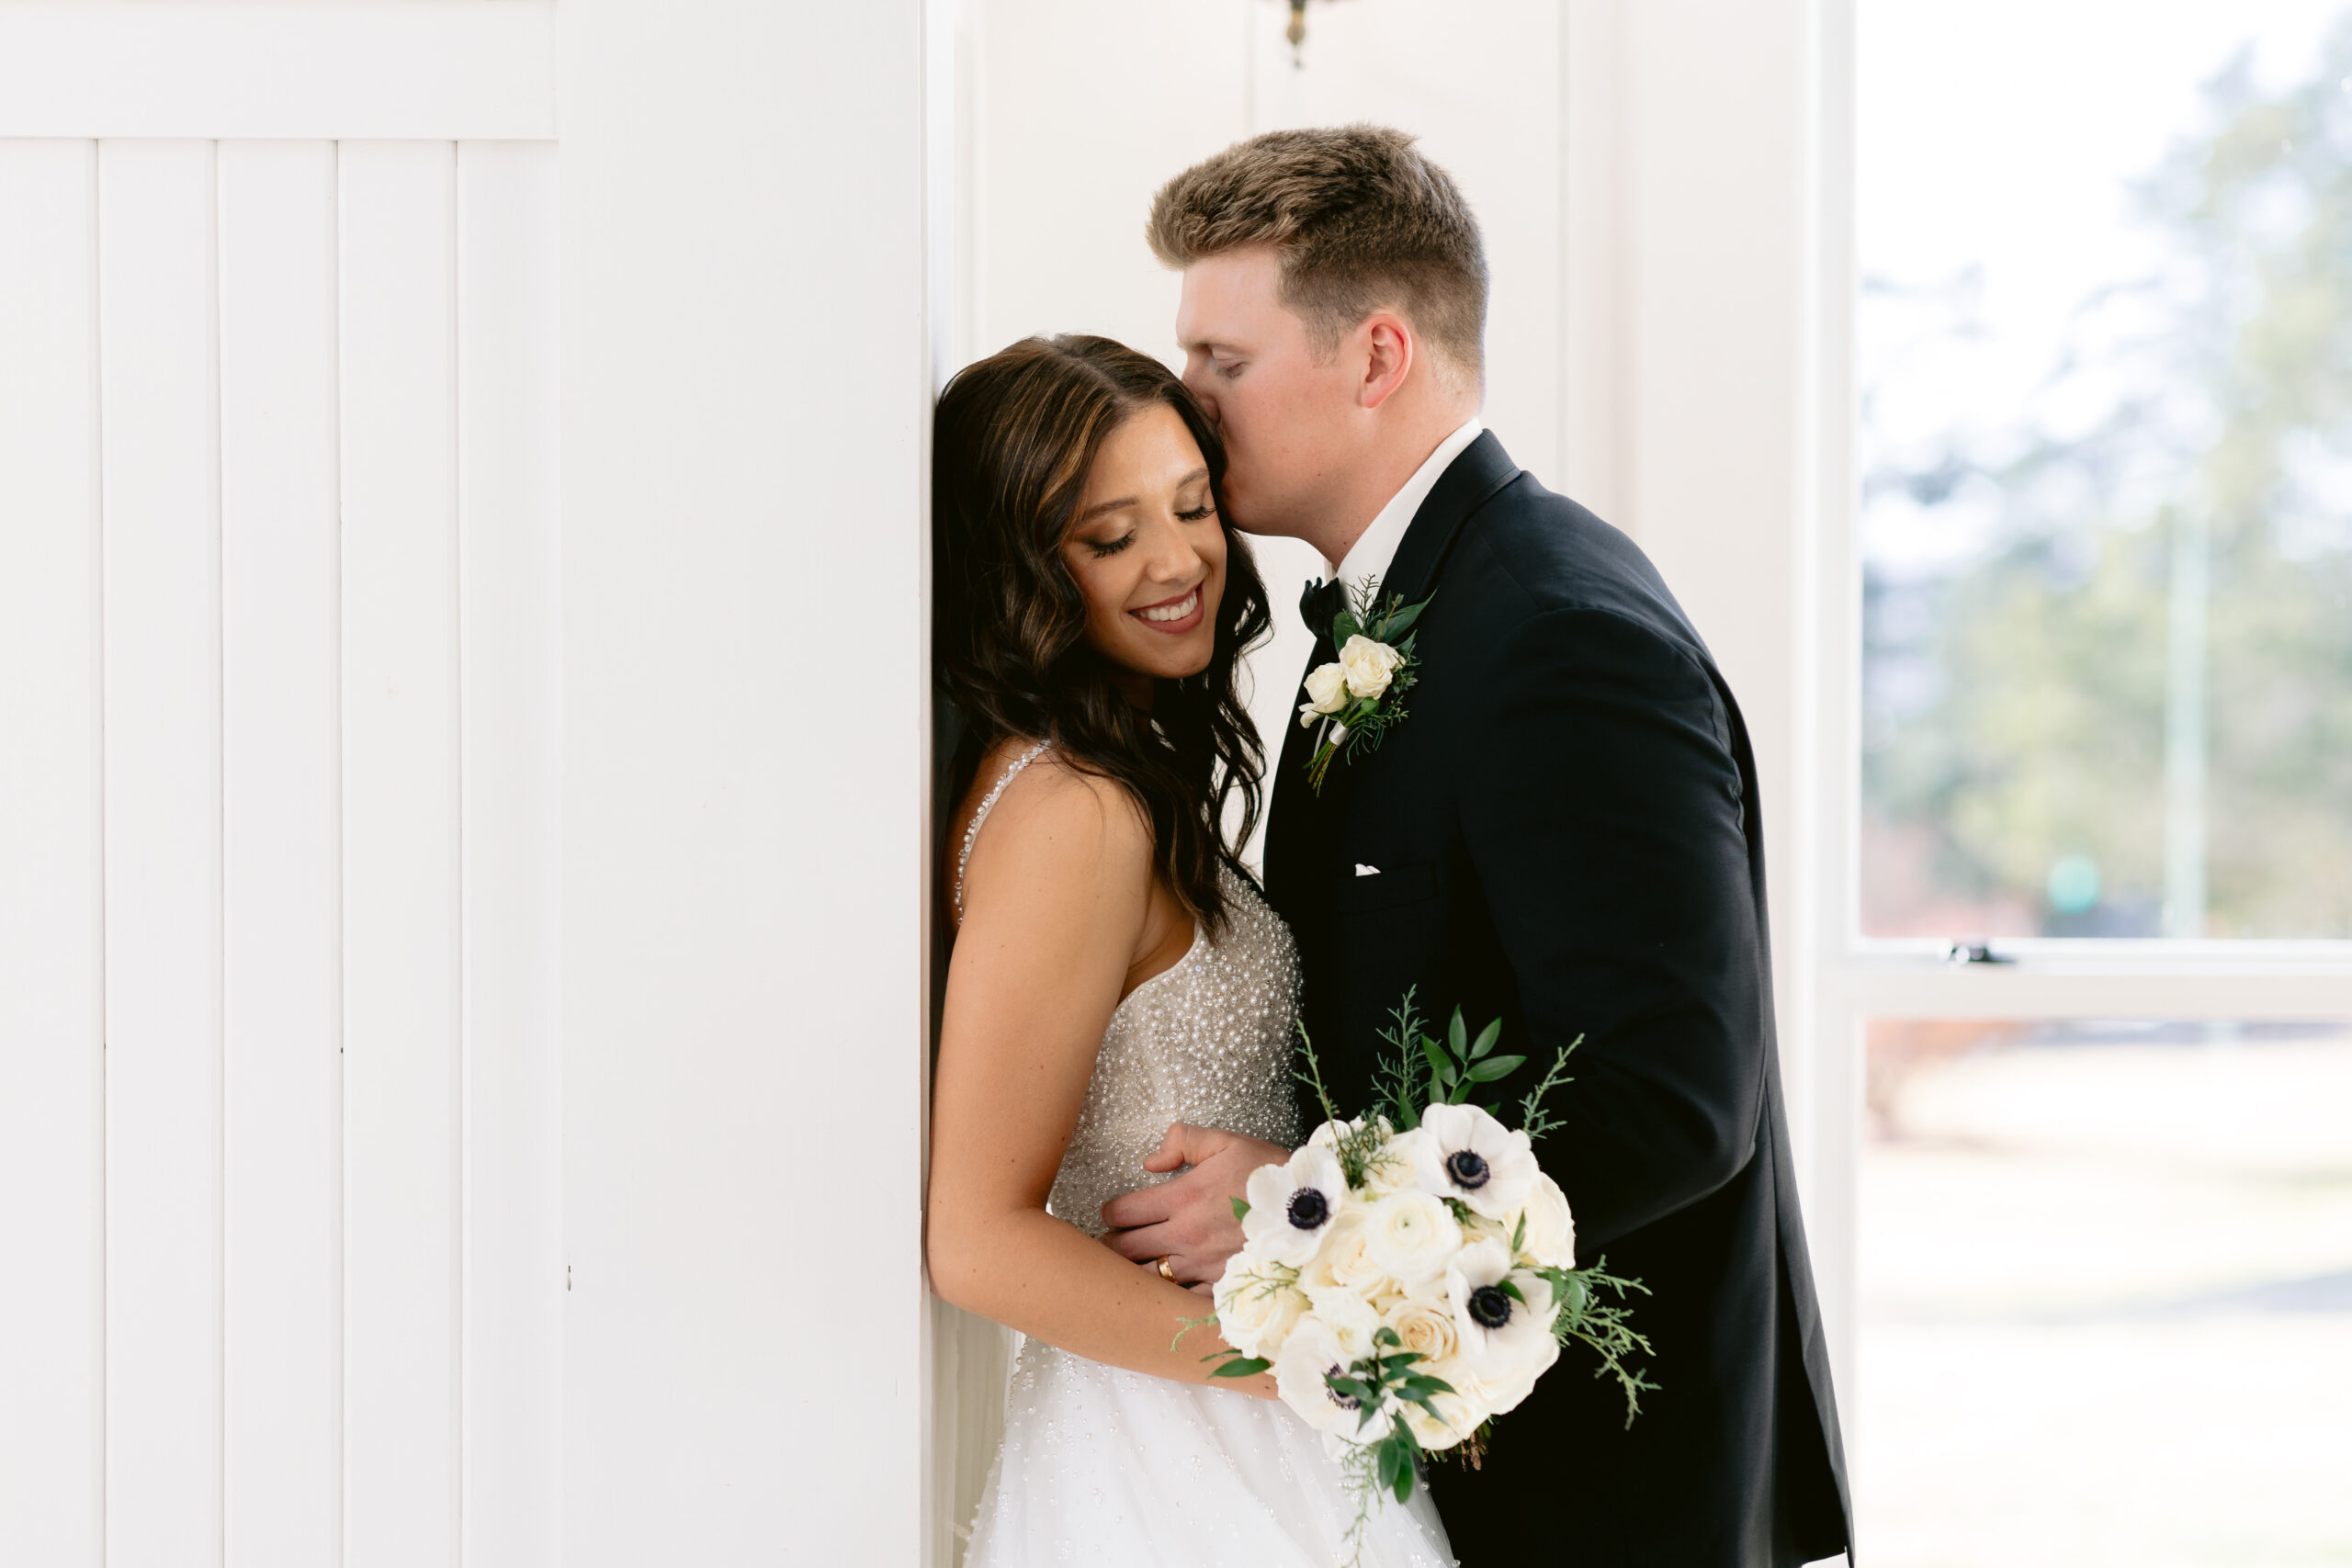 Bride and Groom Portrait inside the Garden Chapel. Photographed by Tatyana Zadorin Photography